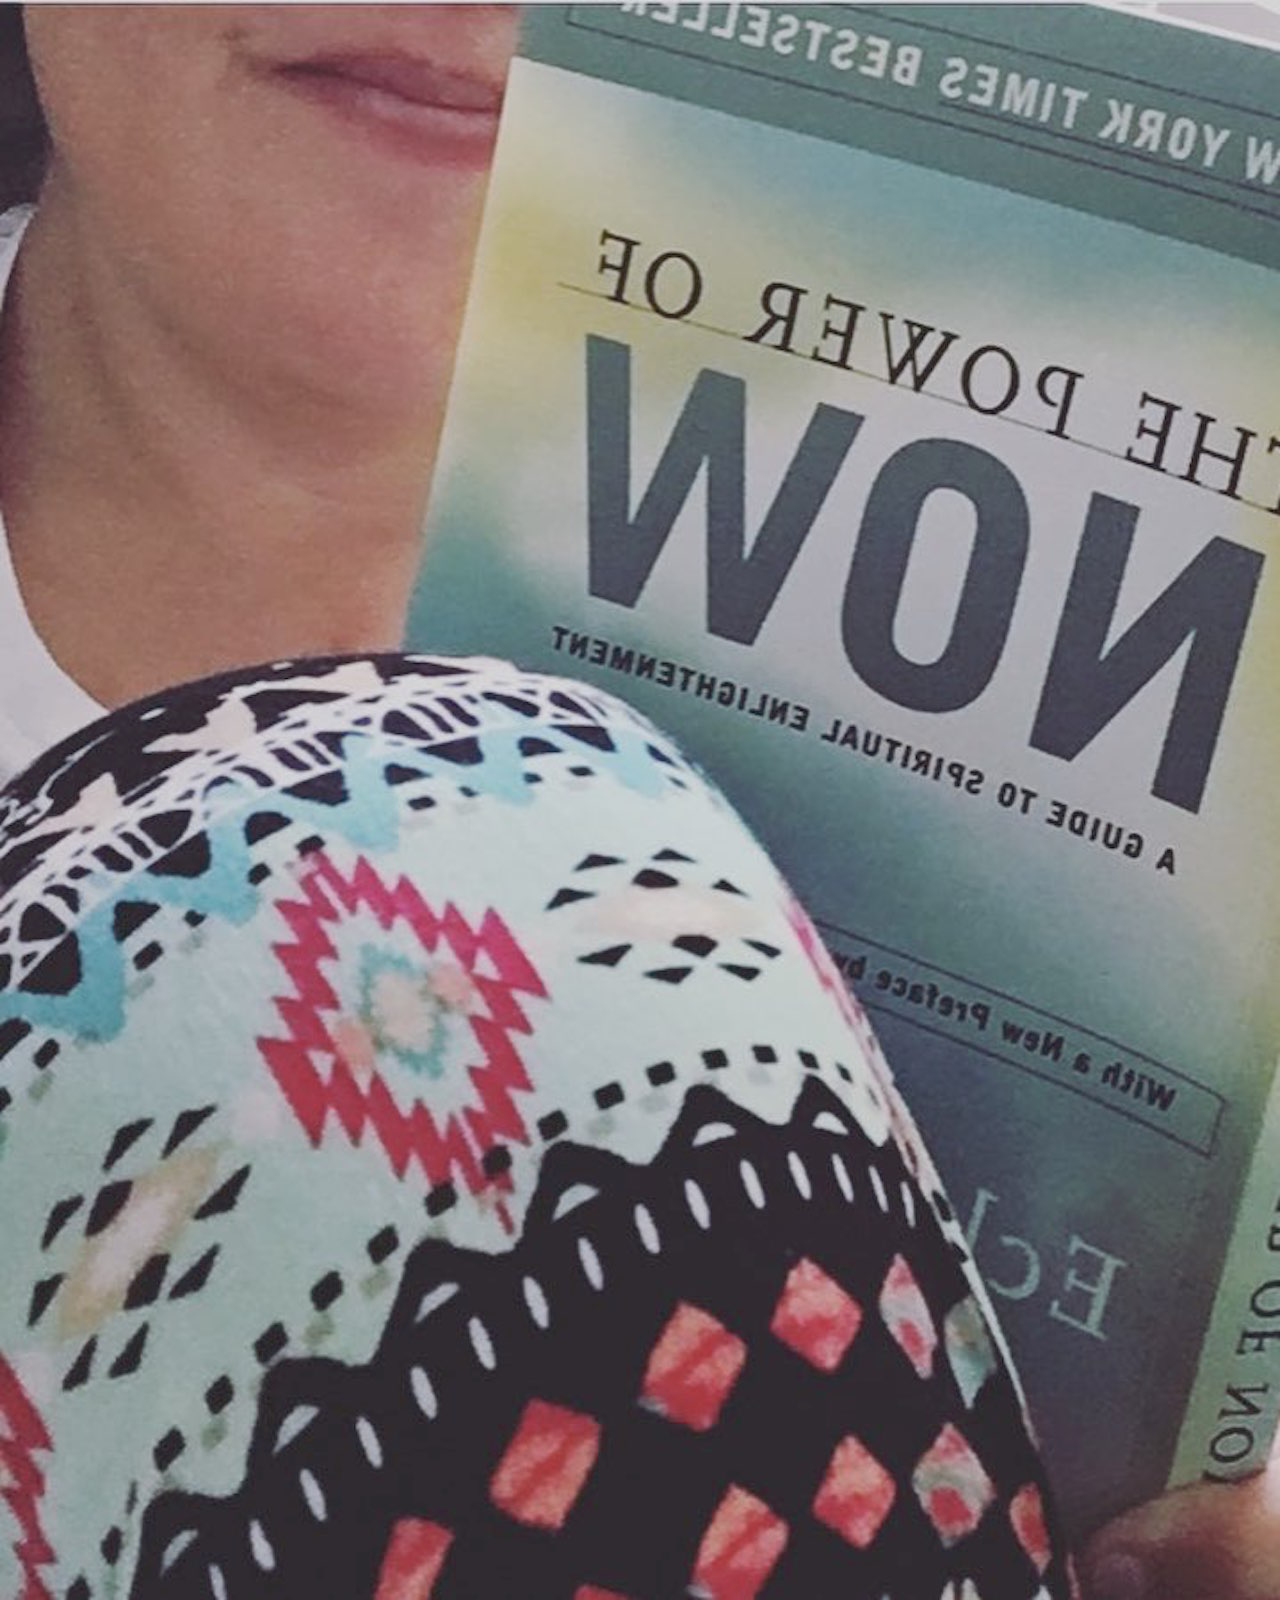 woman wearing patterned leggings and holding a book that says "the power of now"